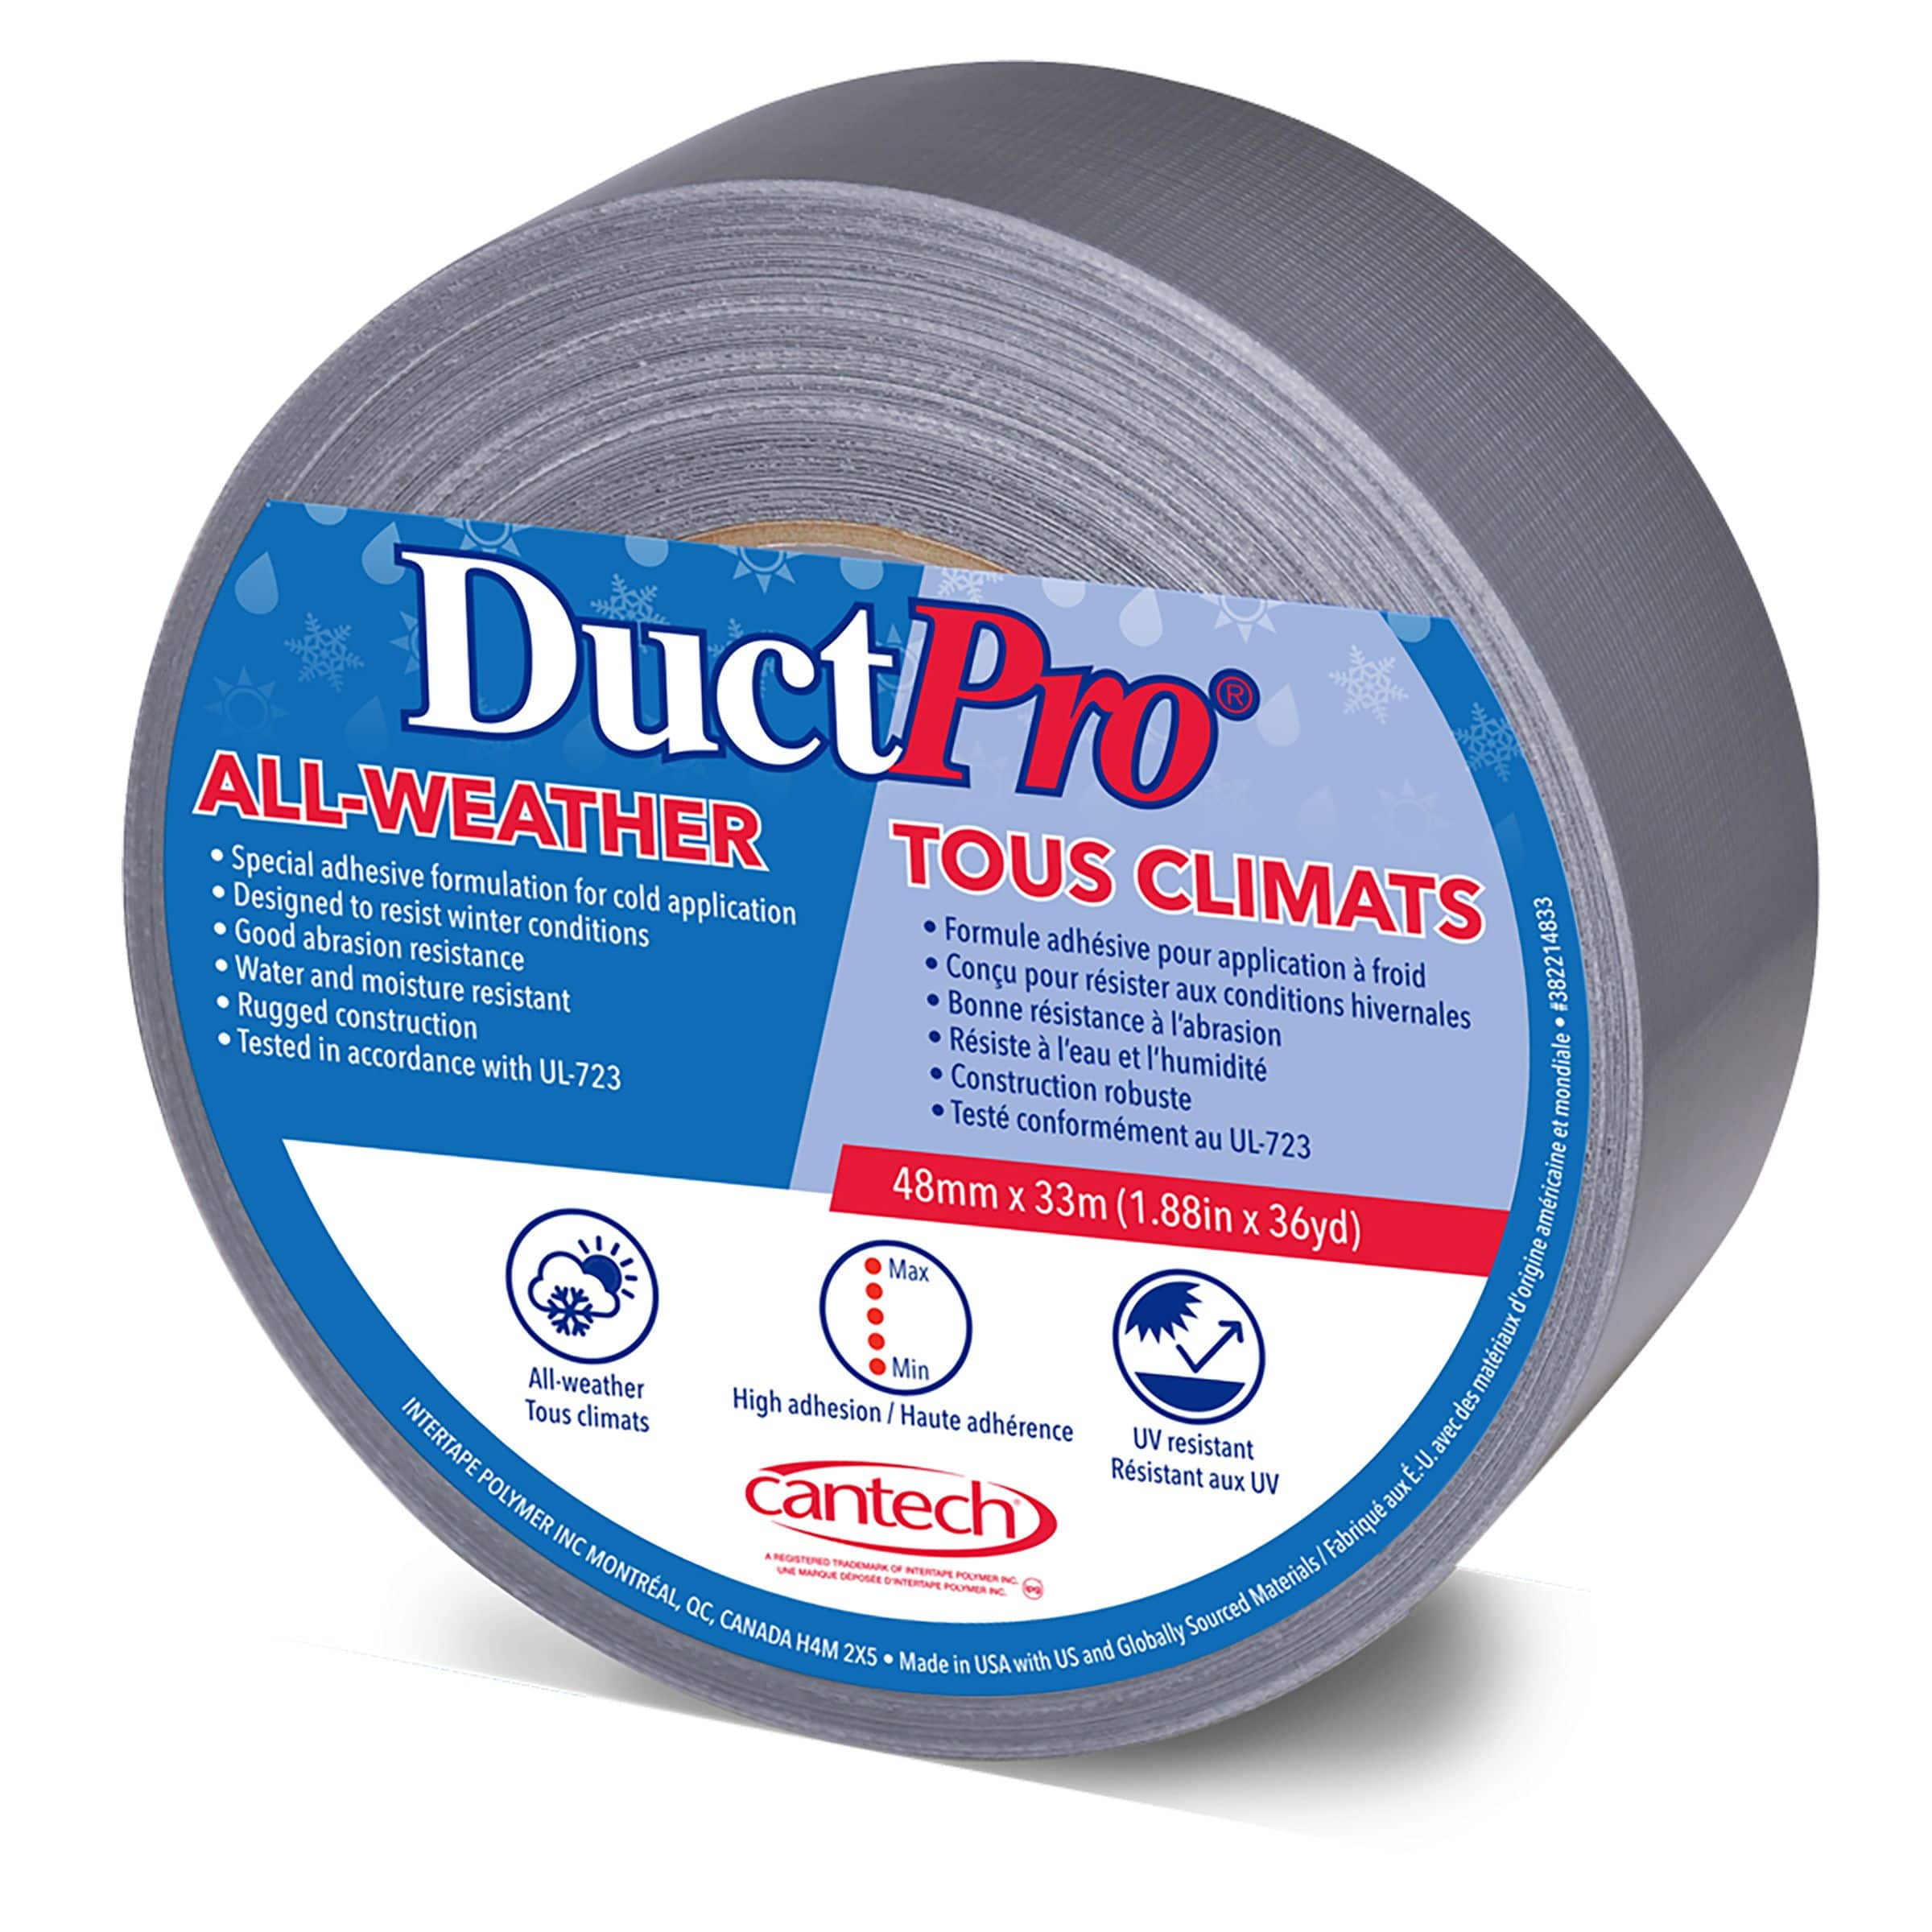 https://media-www.canadiantire.ca/product/fixing/paint/surface-prep-maintenance/0676014/snow-ice-duct-tape-66e07fbc-2fe0-40f9-b917-88a9f9e361f7-jpgrendition.jpg